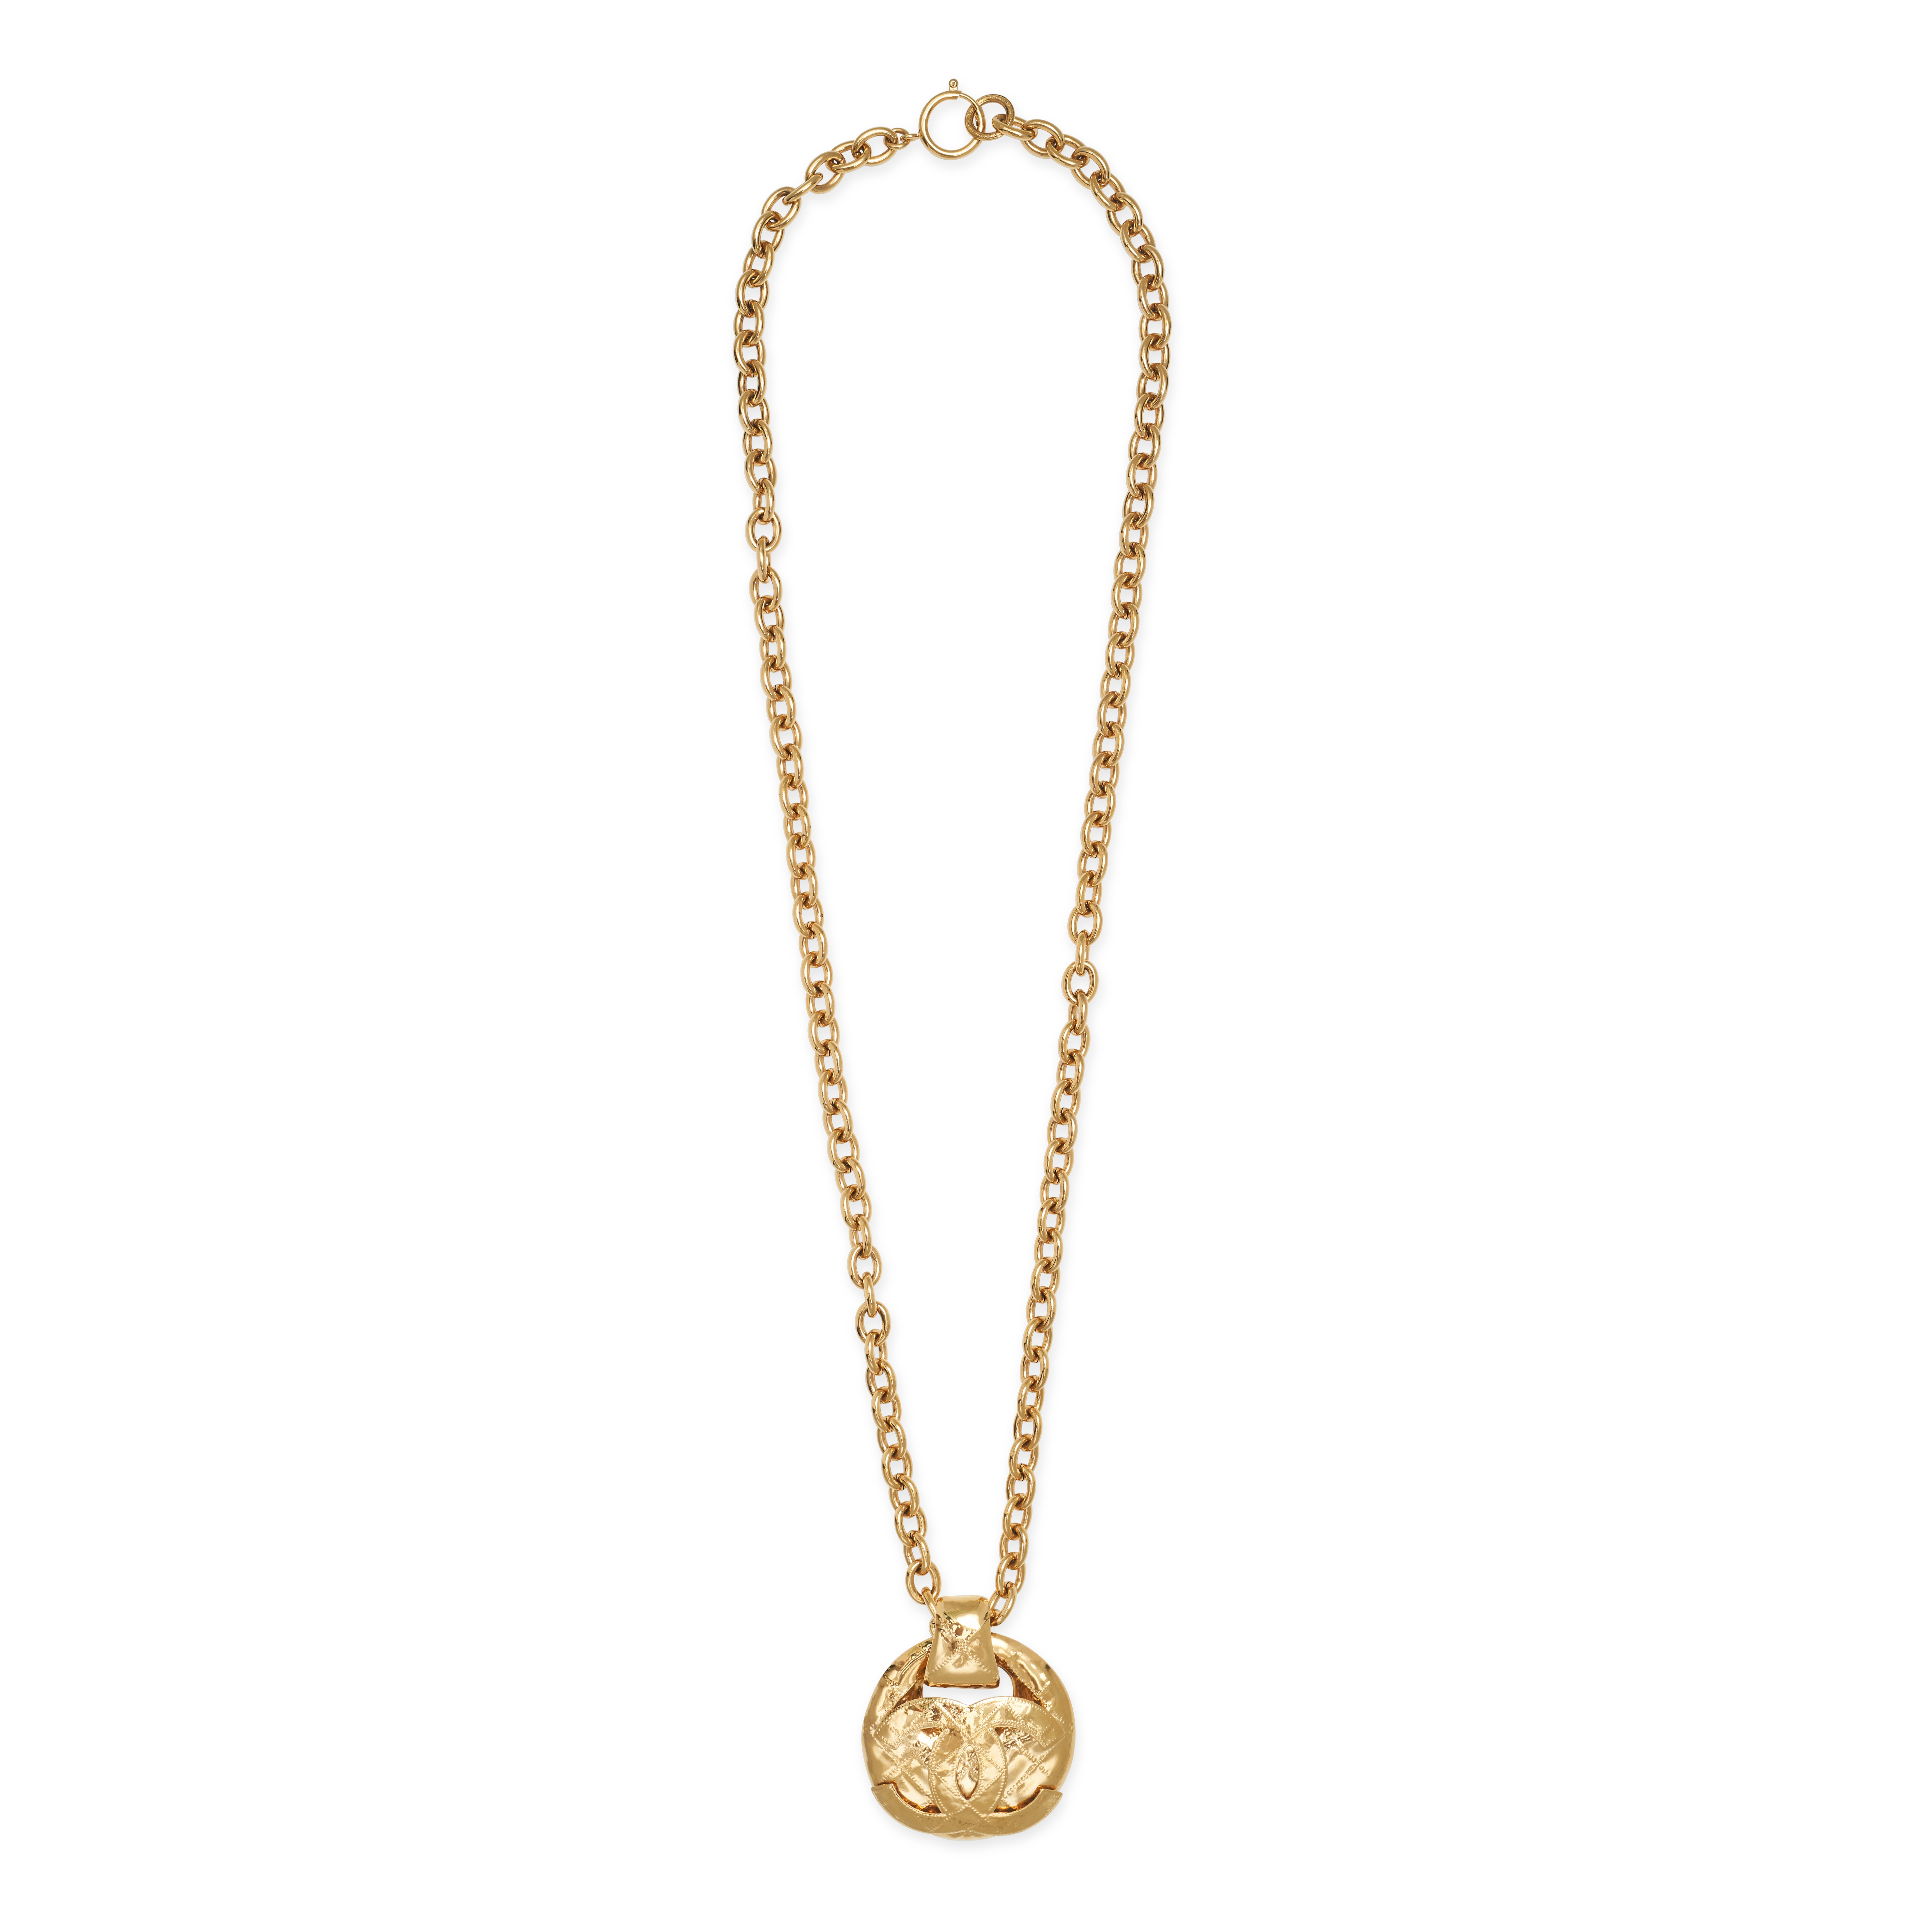 CHANEL, A VINTAGE PENDANT AND CHAIN comprising a quilted circular pendant with interlocking CC mo... - Image 2 of 3